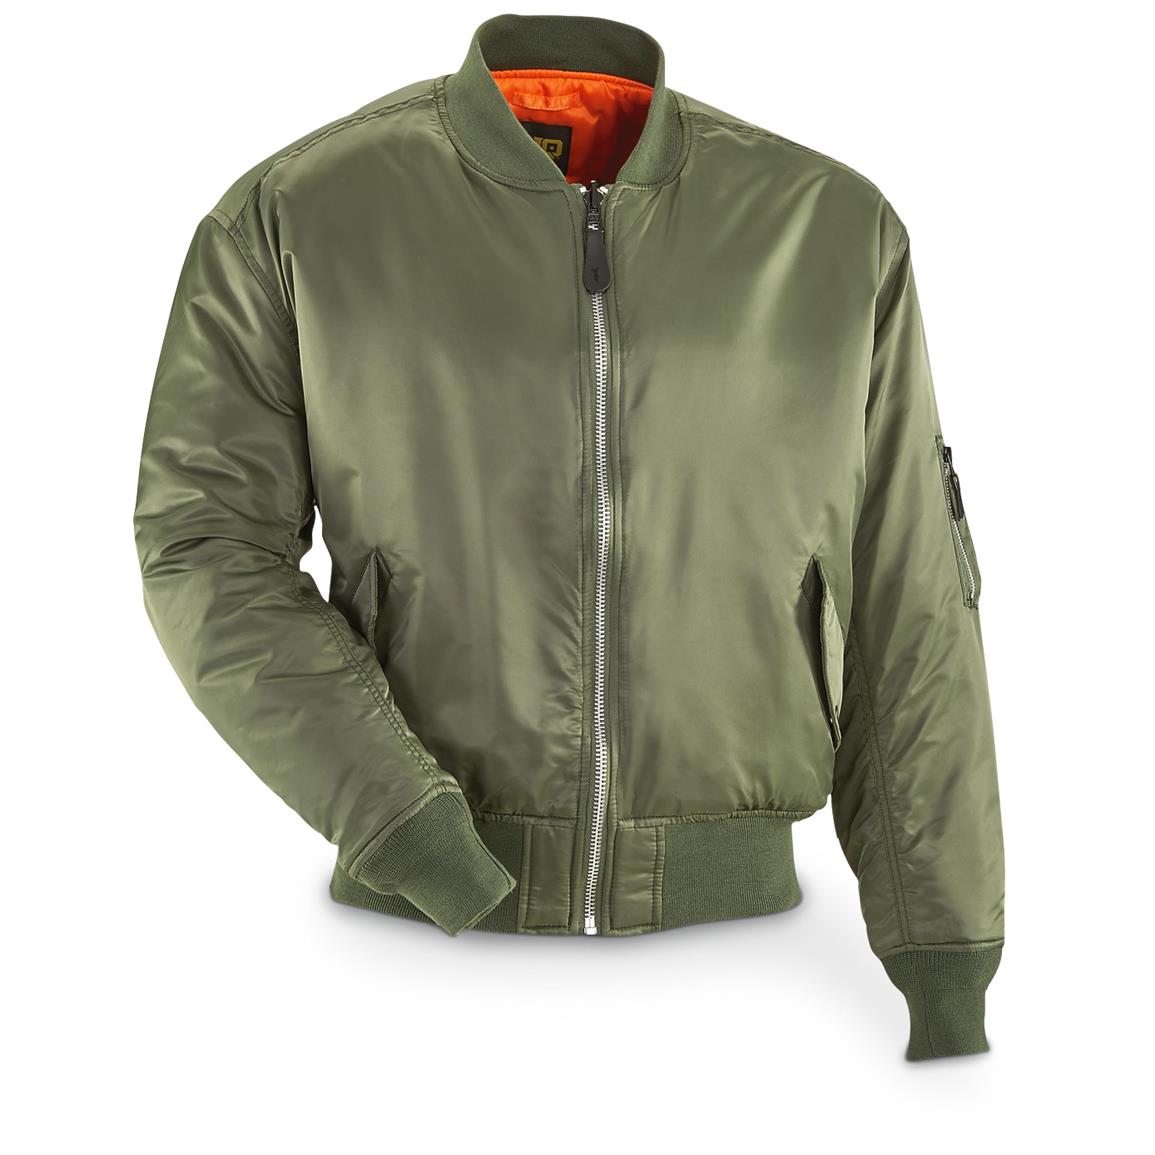 HQ ISSUE Men's MA-1 Bomber Jacket - 615203, Tactical Clothing at ...